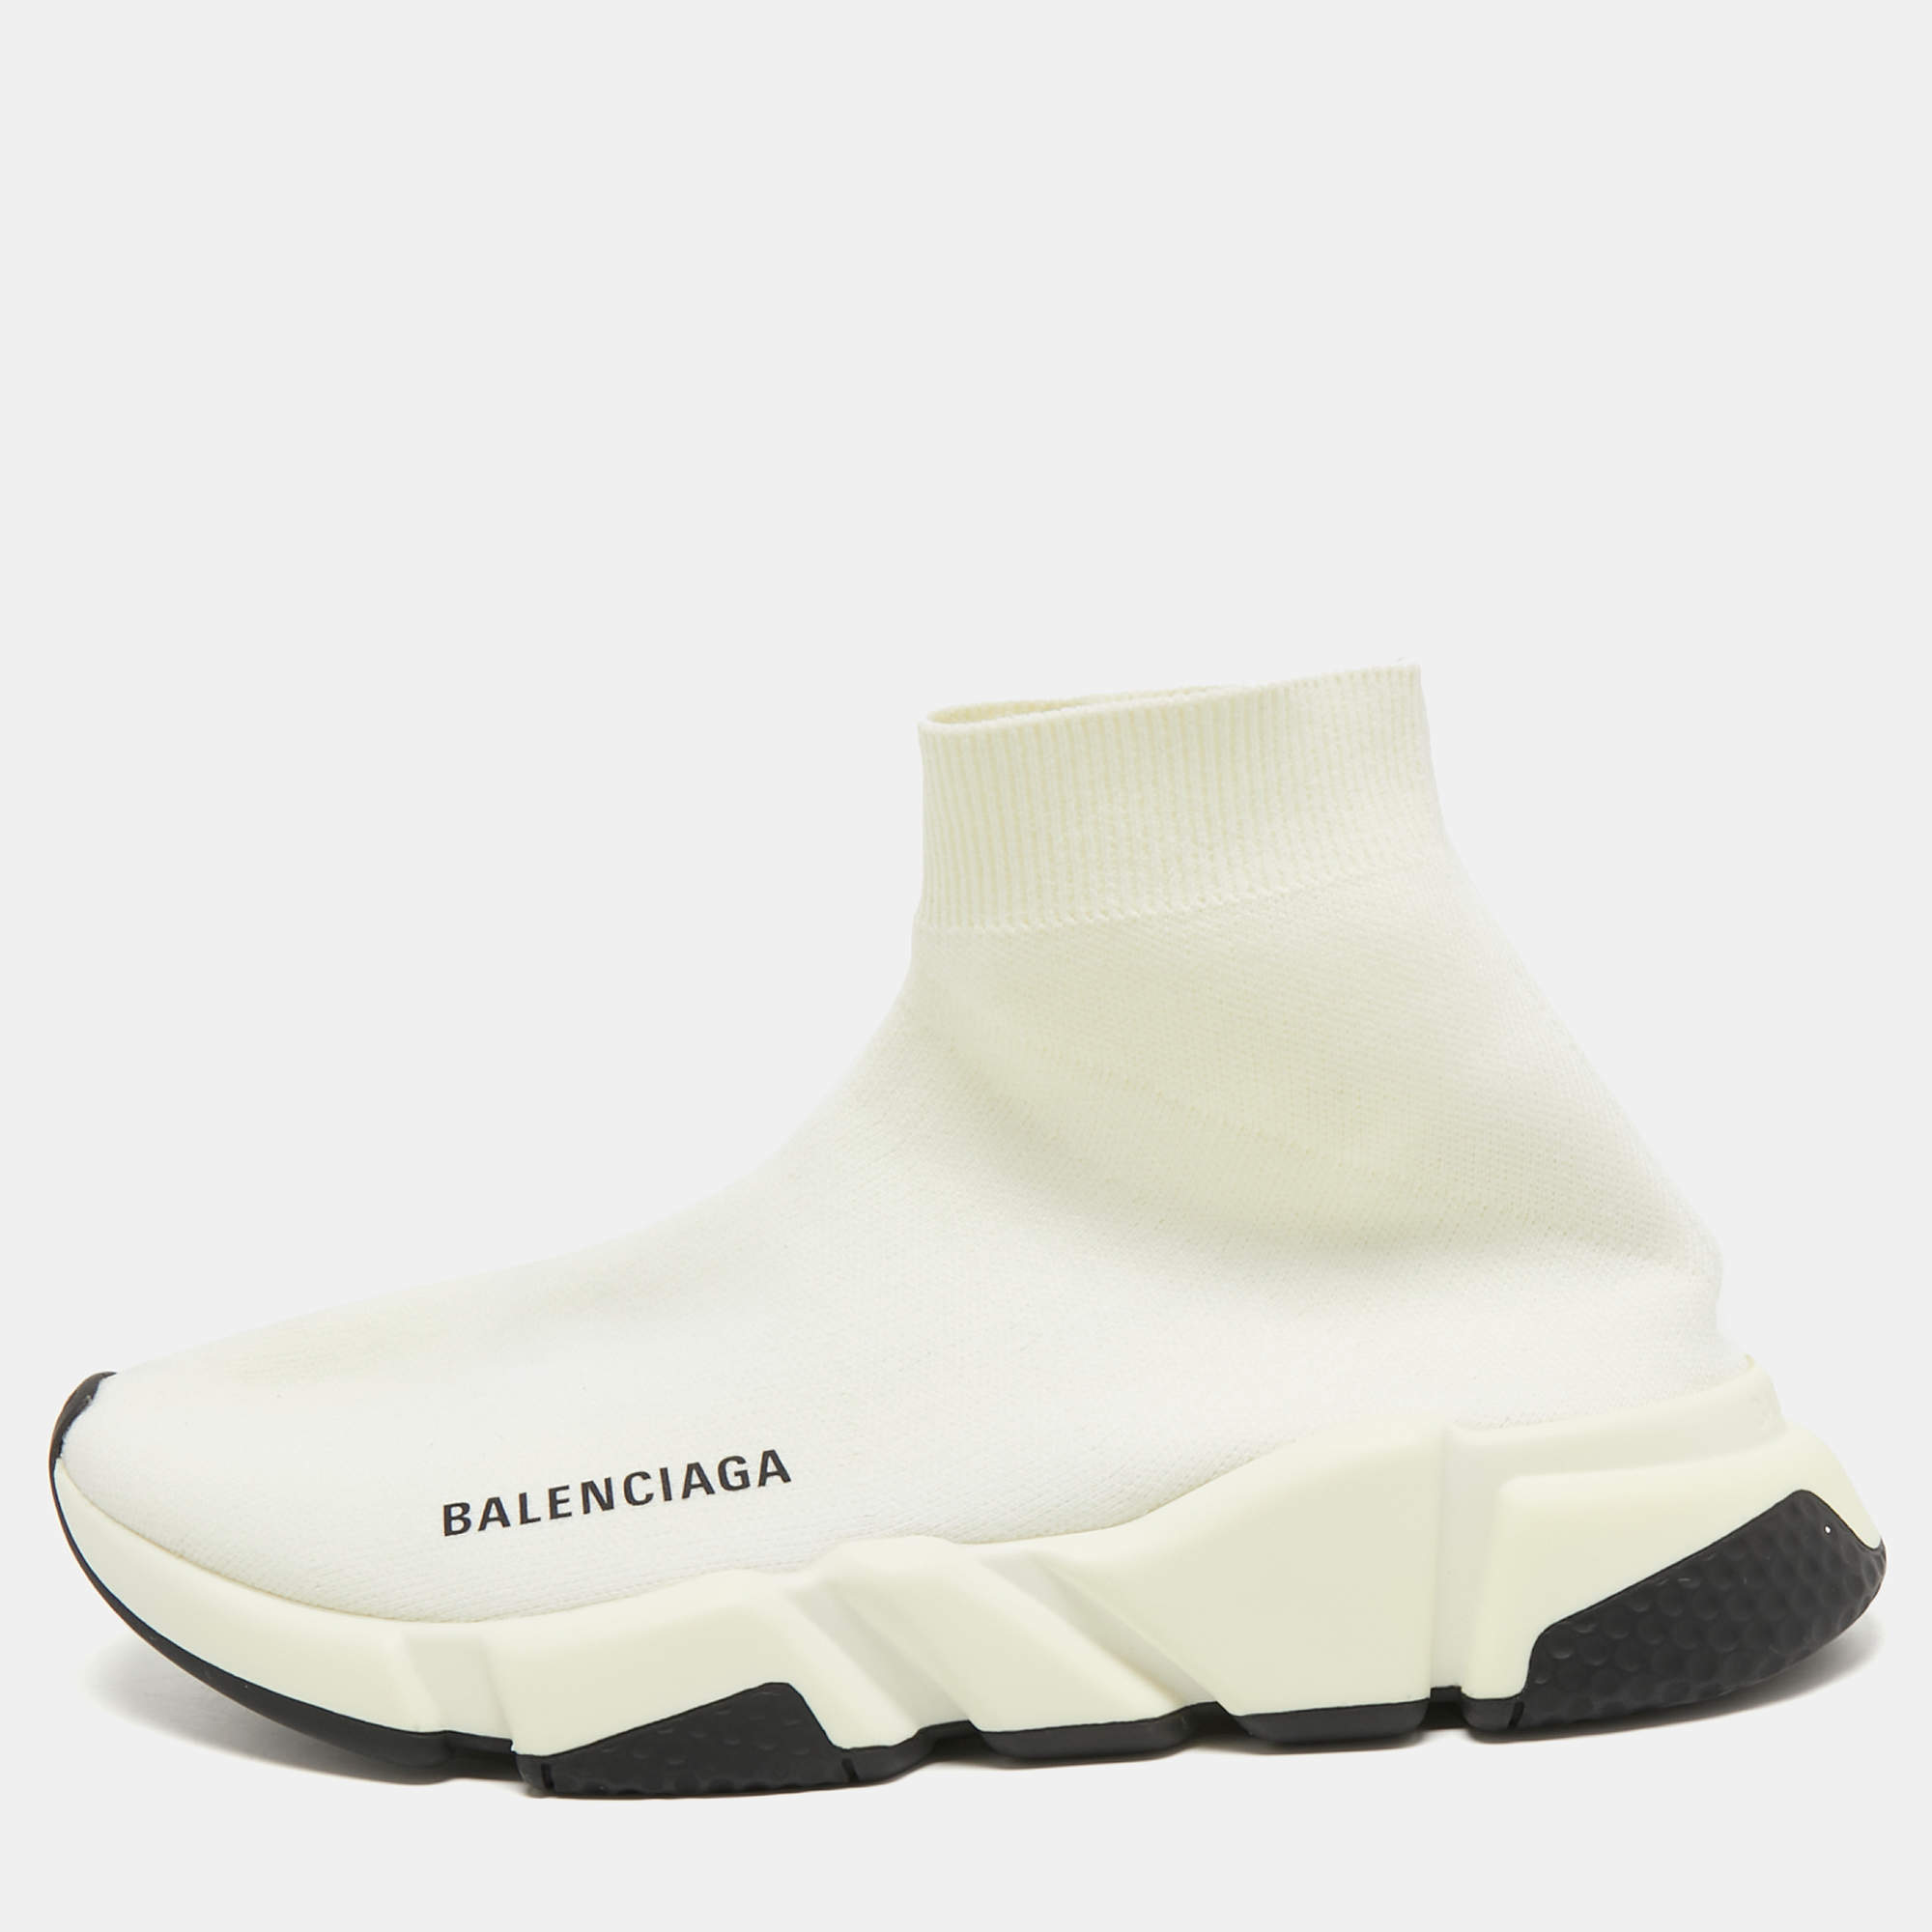 Balenciaga Cream Knit Fabric Speed Trainer Sneakers Size 38